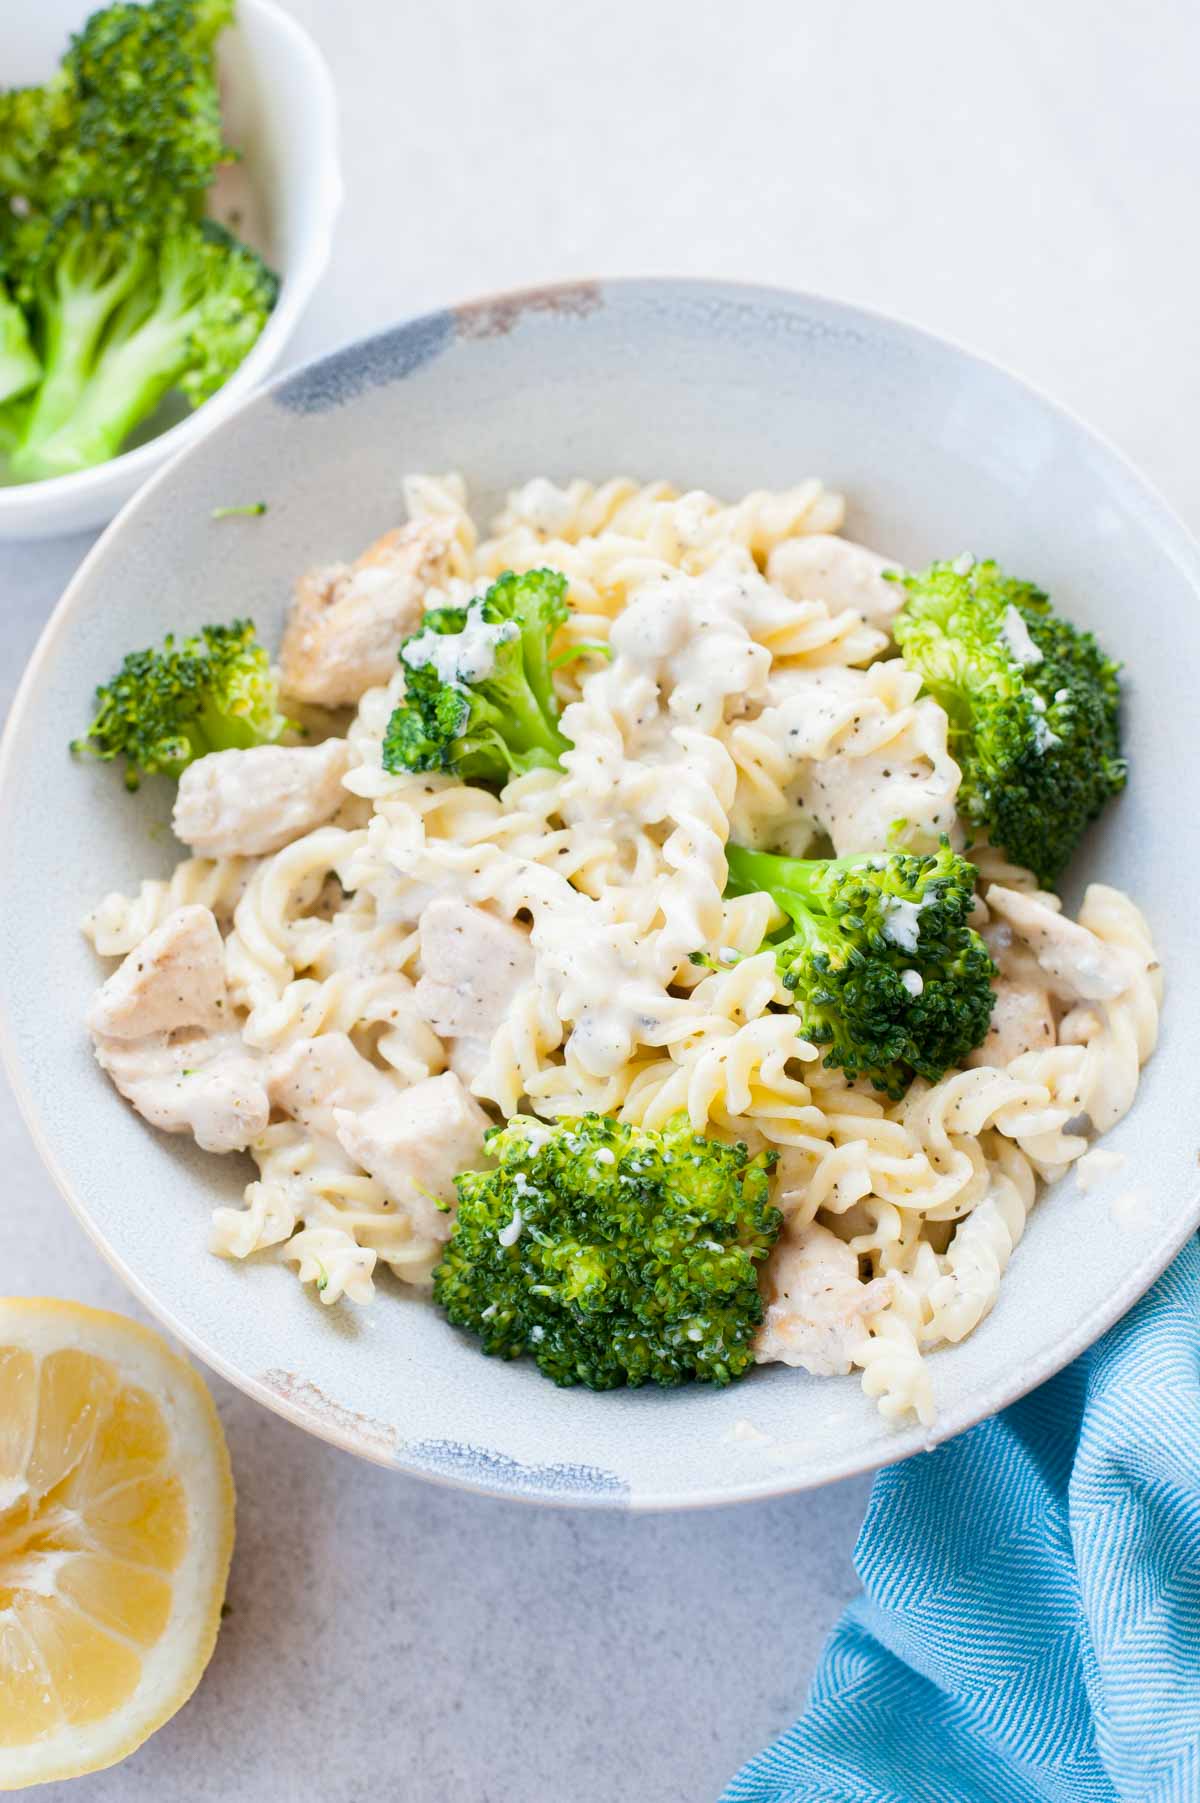 Four cheese pasta with chicken and broccoli in a blue plate.